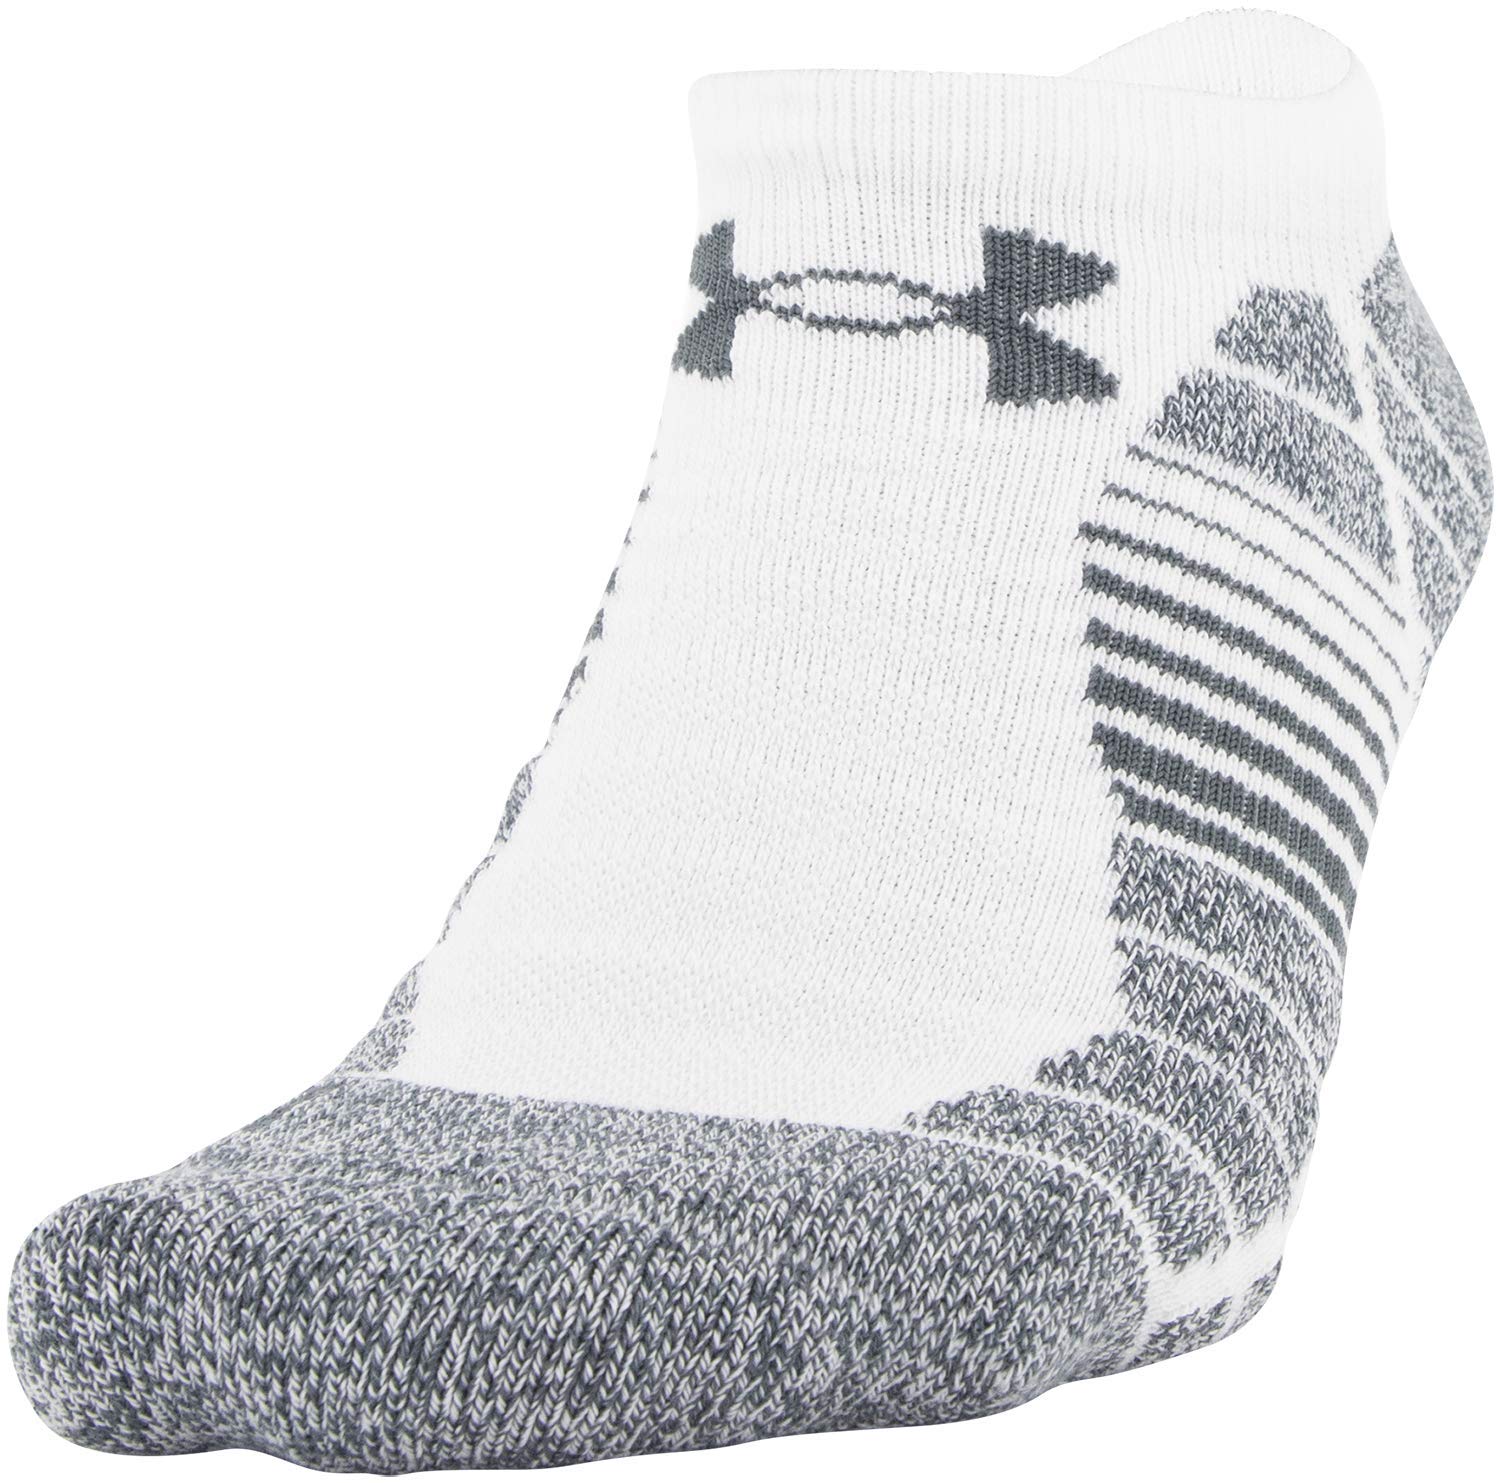 Under Armour unisex-adult Elevated Performance No Show Socks, 3-pairs